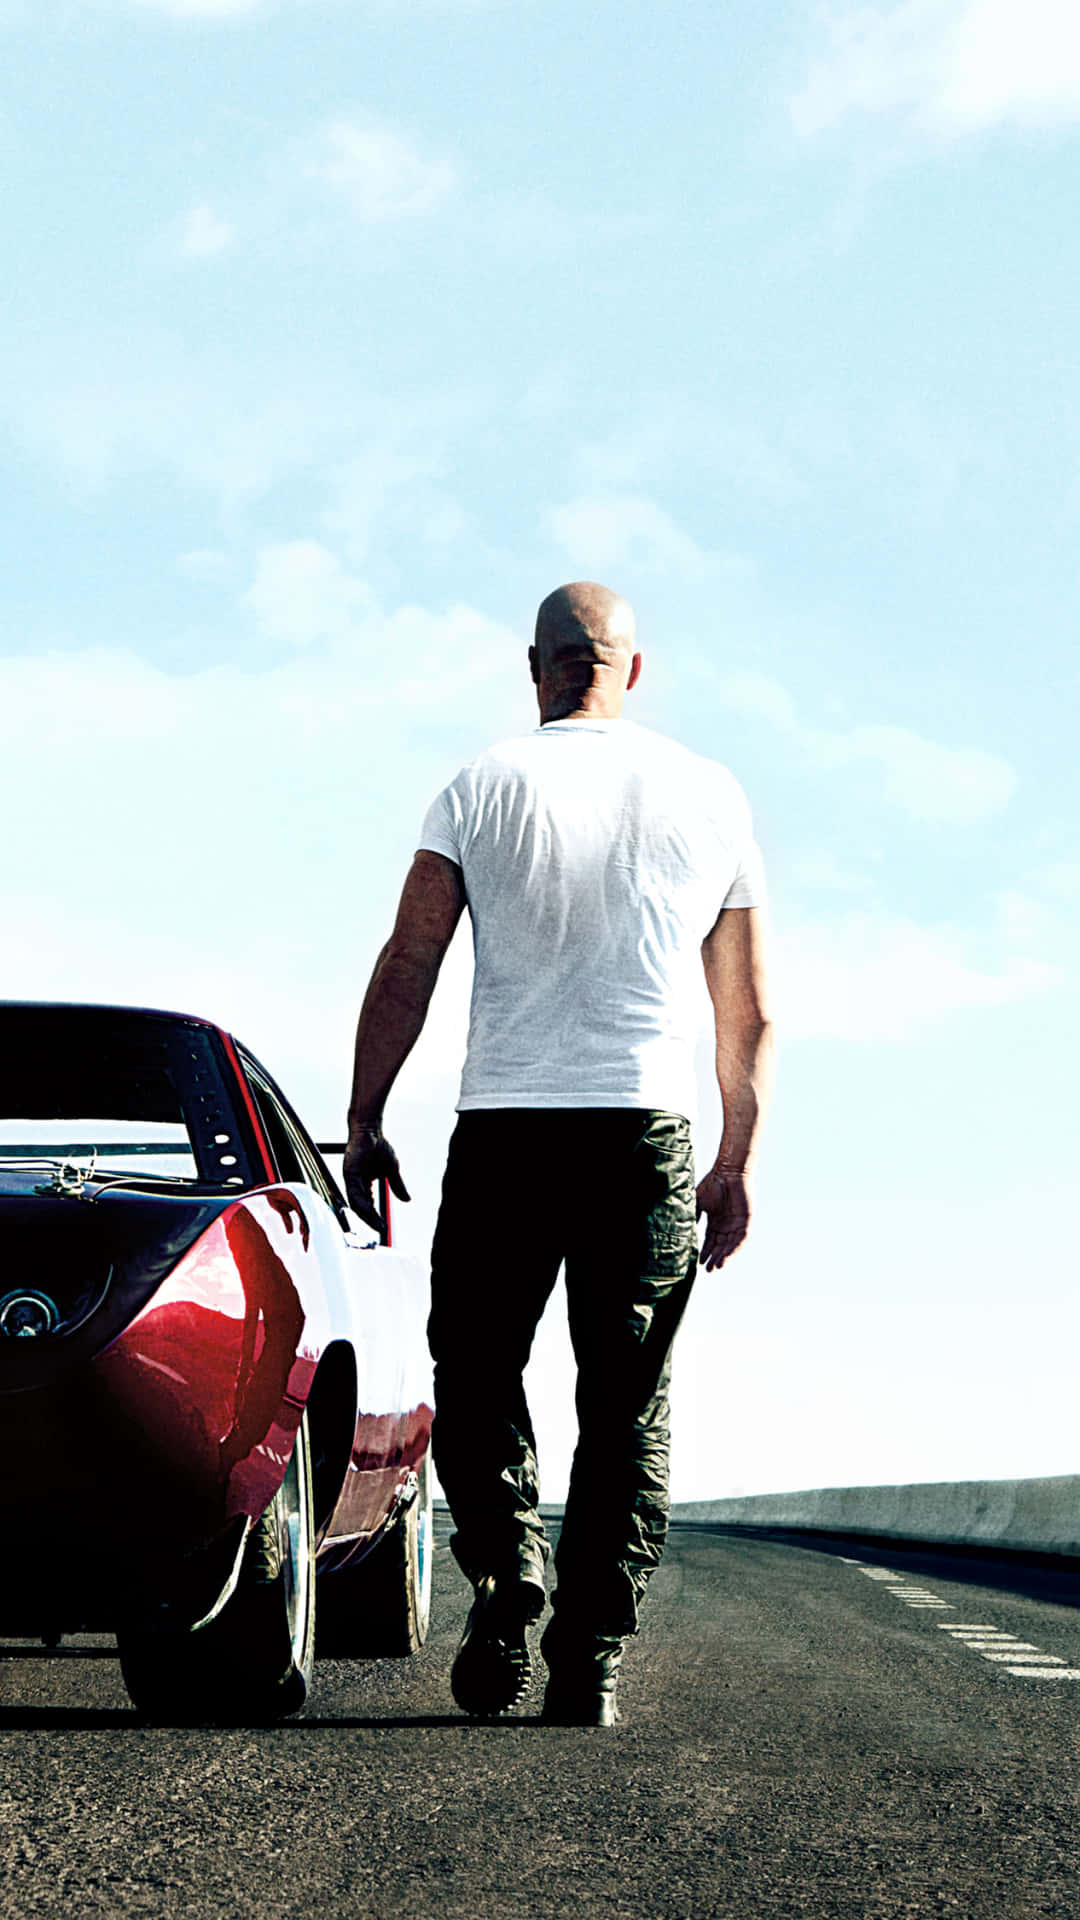 Feel the adrenaline rush with this electrifying HD Fast and Furious background.